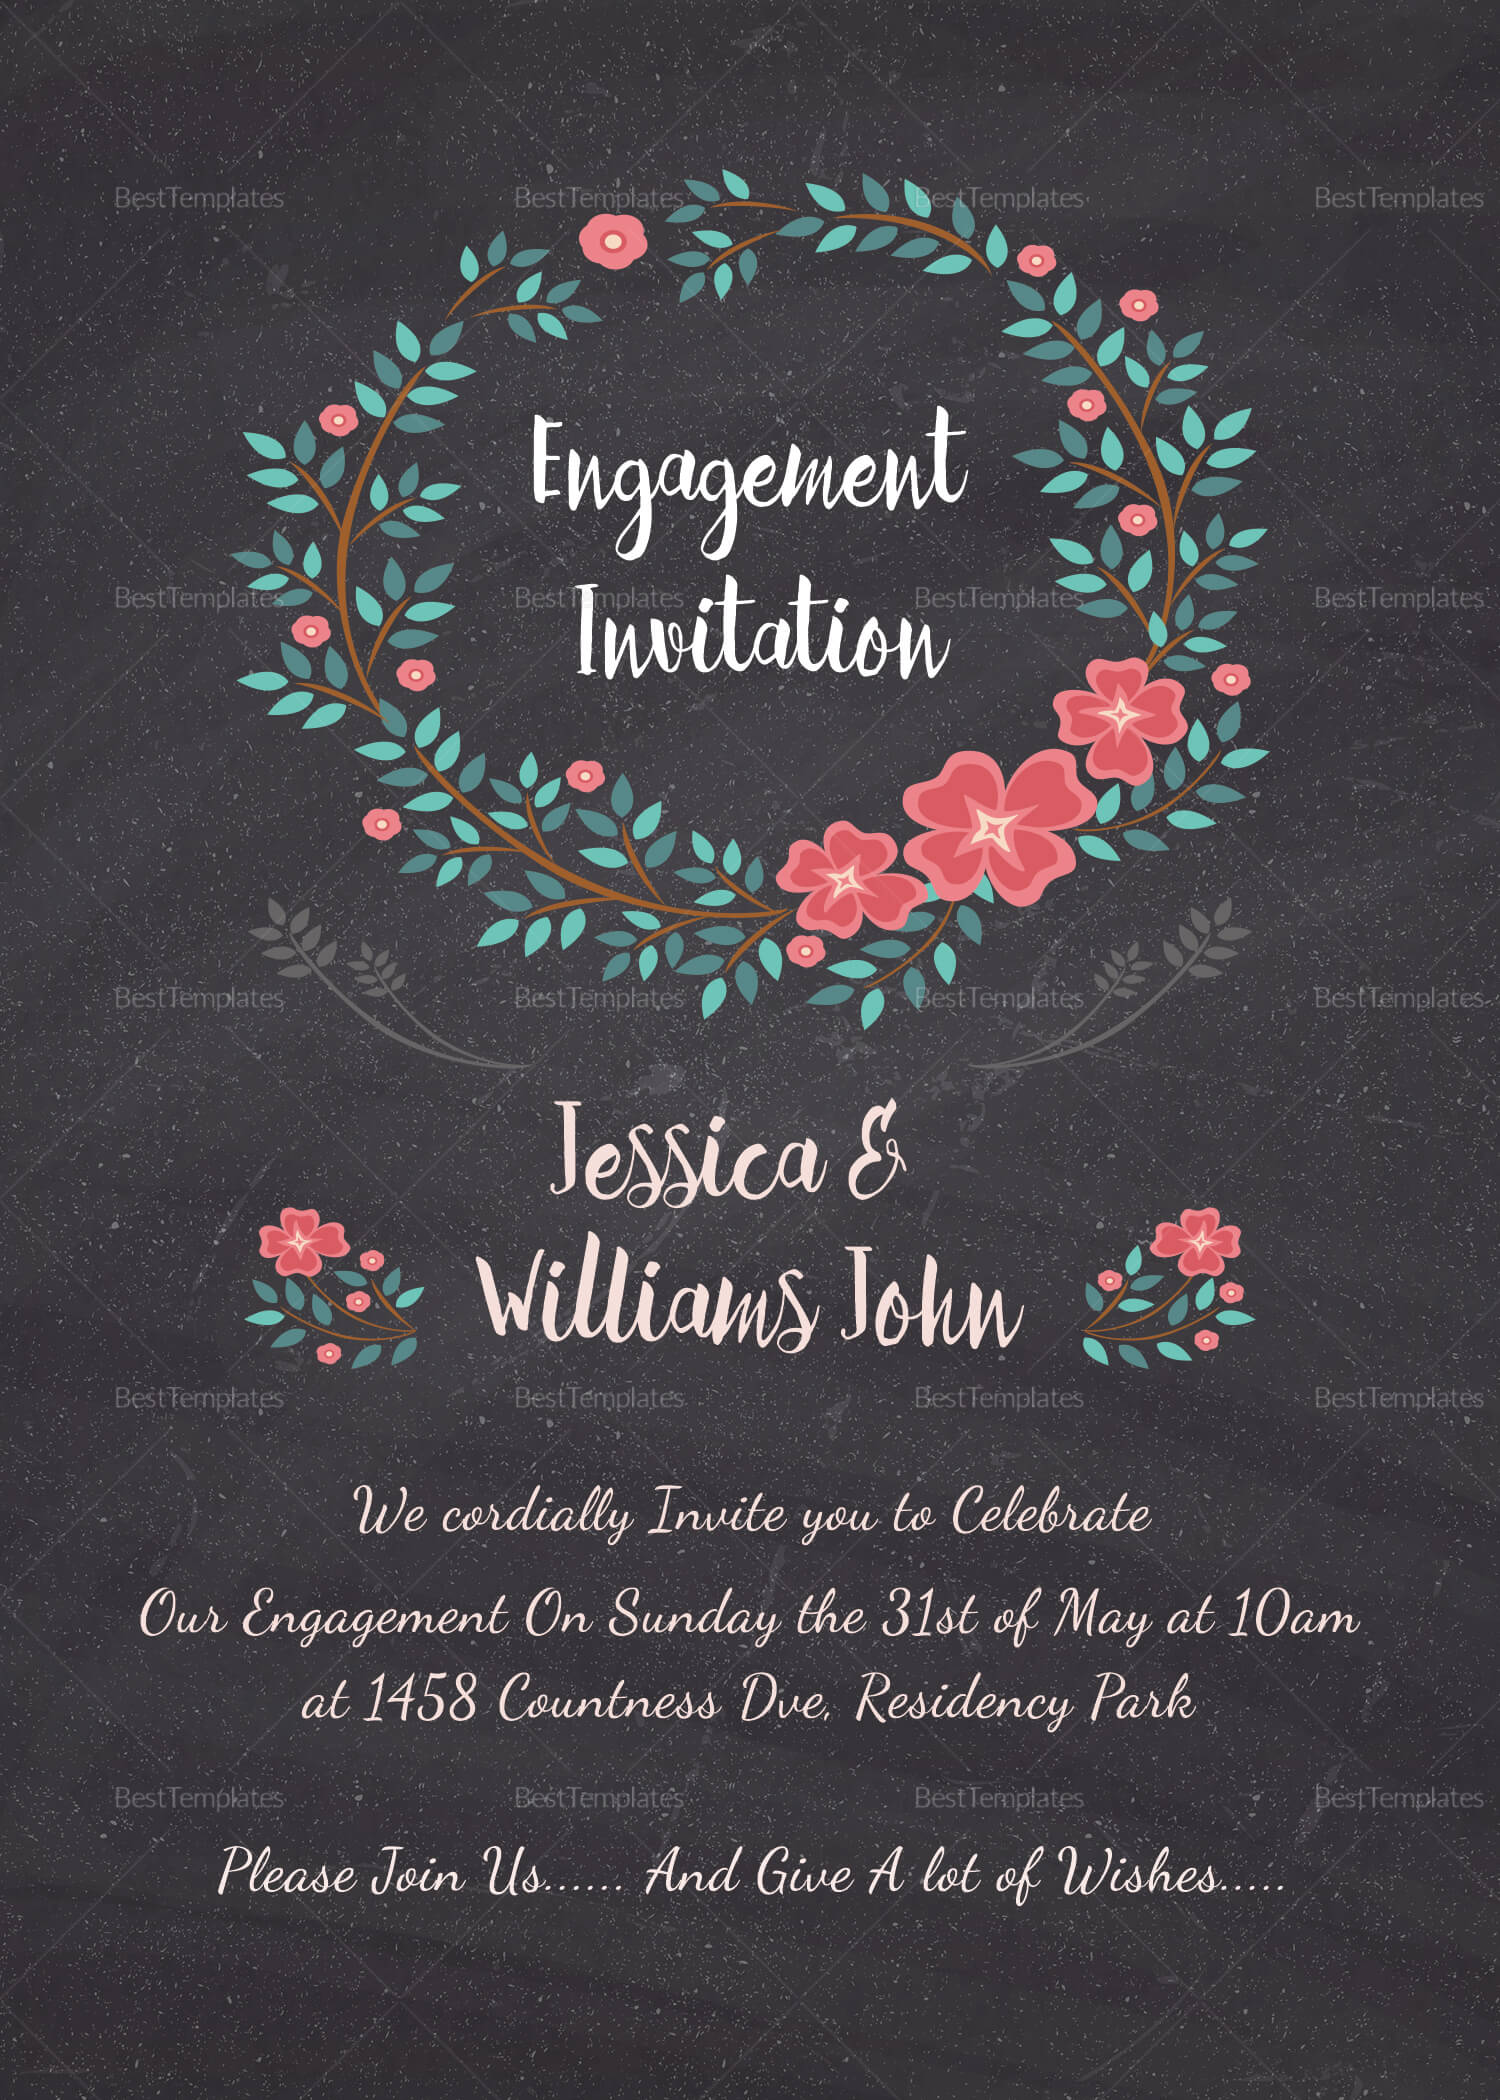 Engagement Invitation Card Template Inside Engagement Invitation Card Template